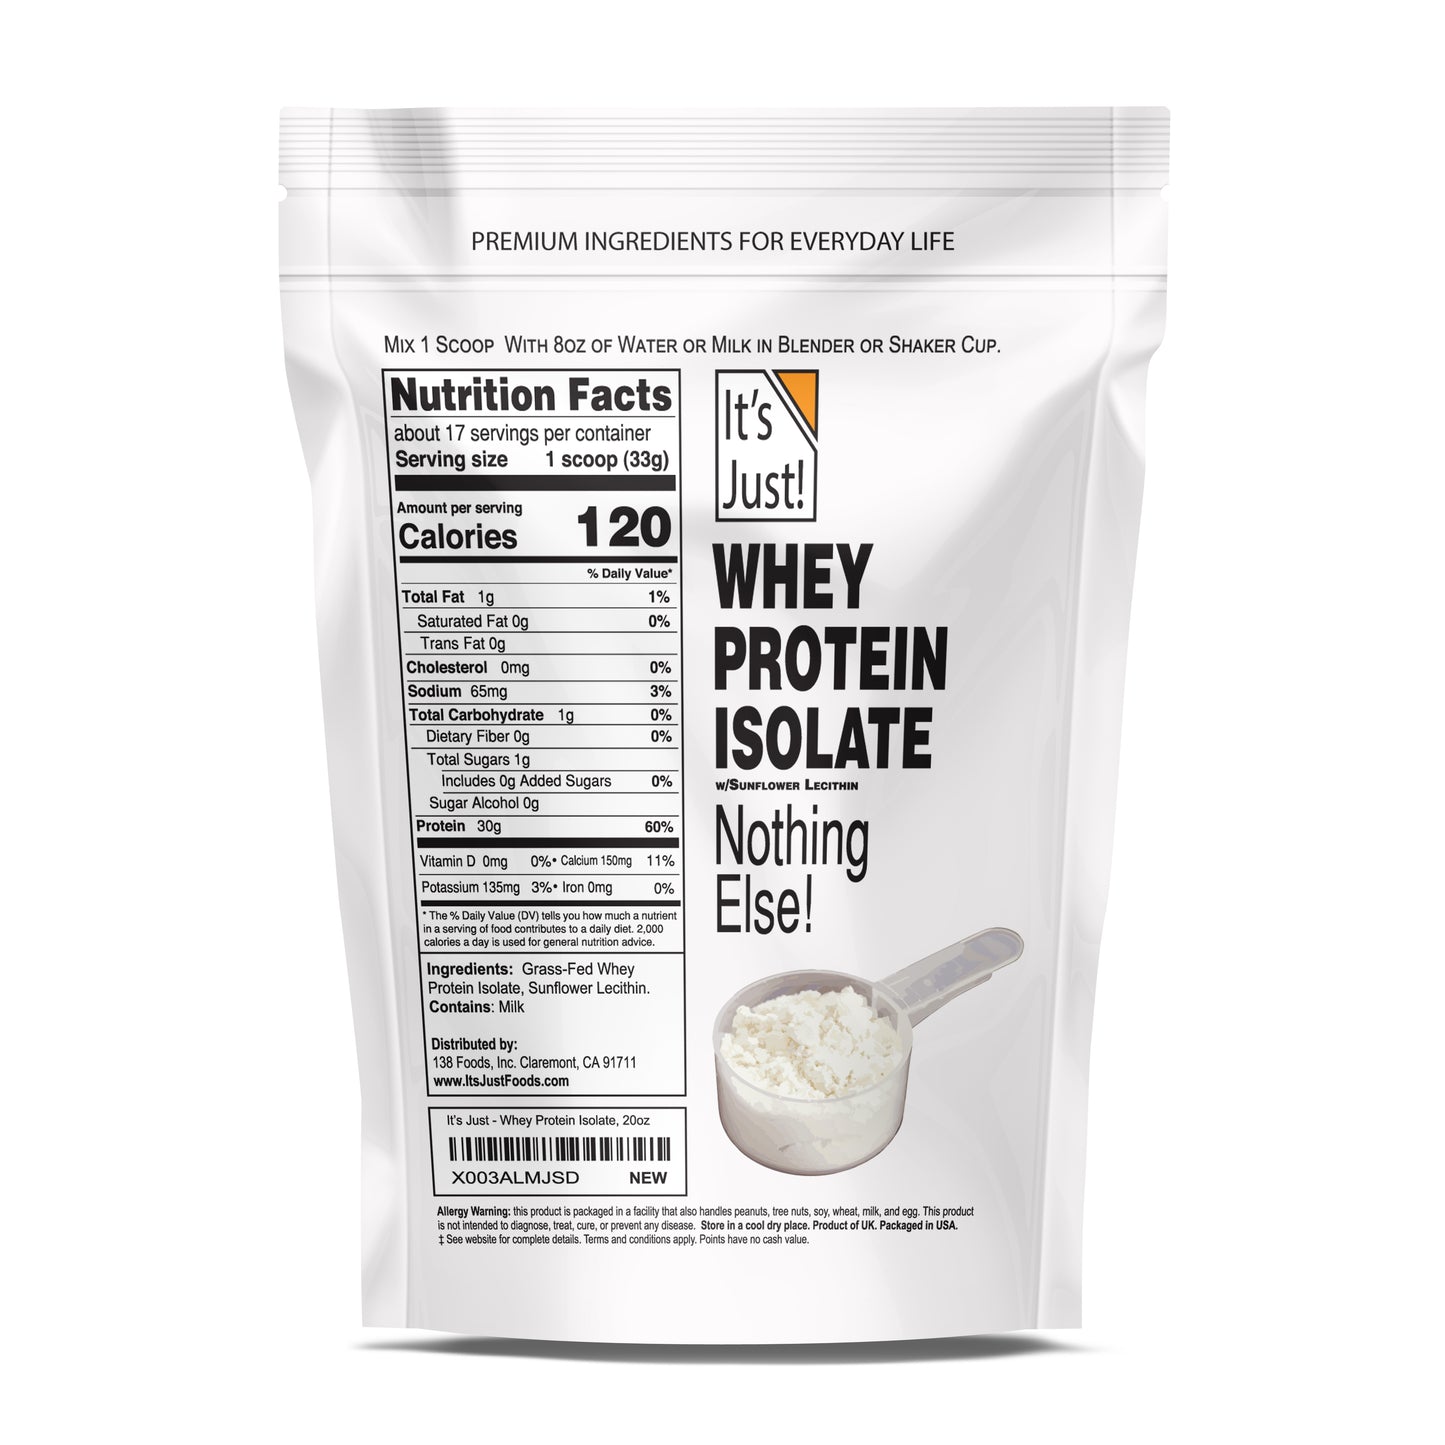 It's Just! - Whey Protein Isolate